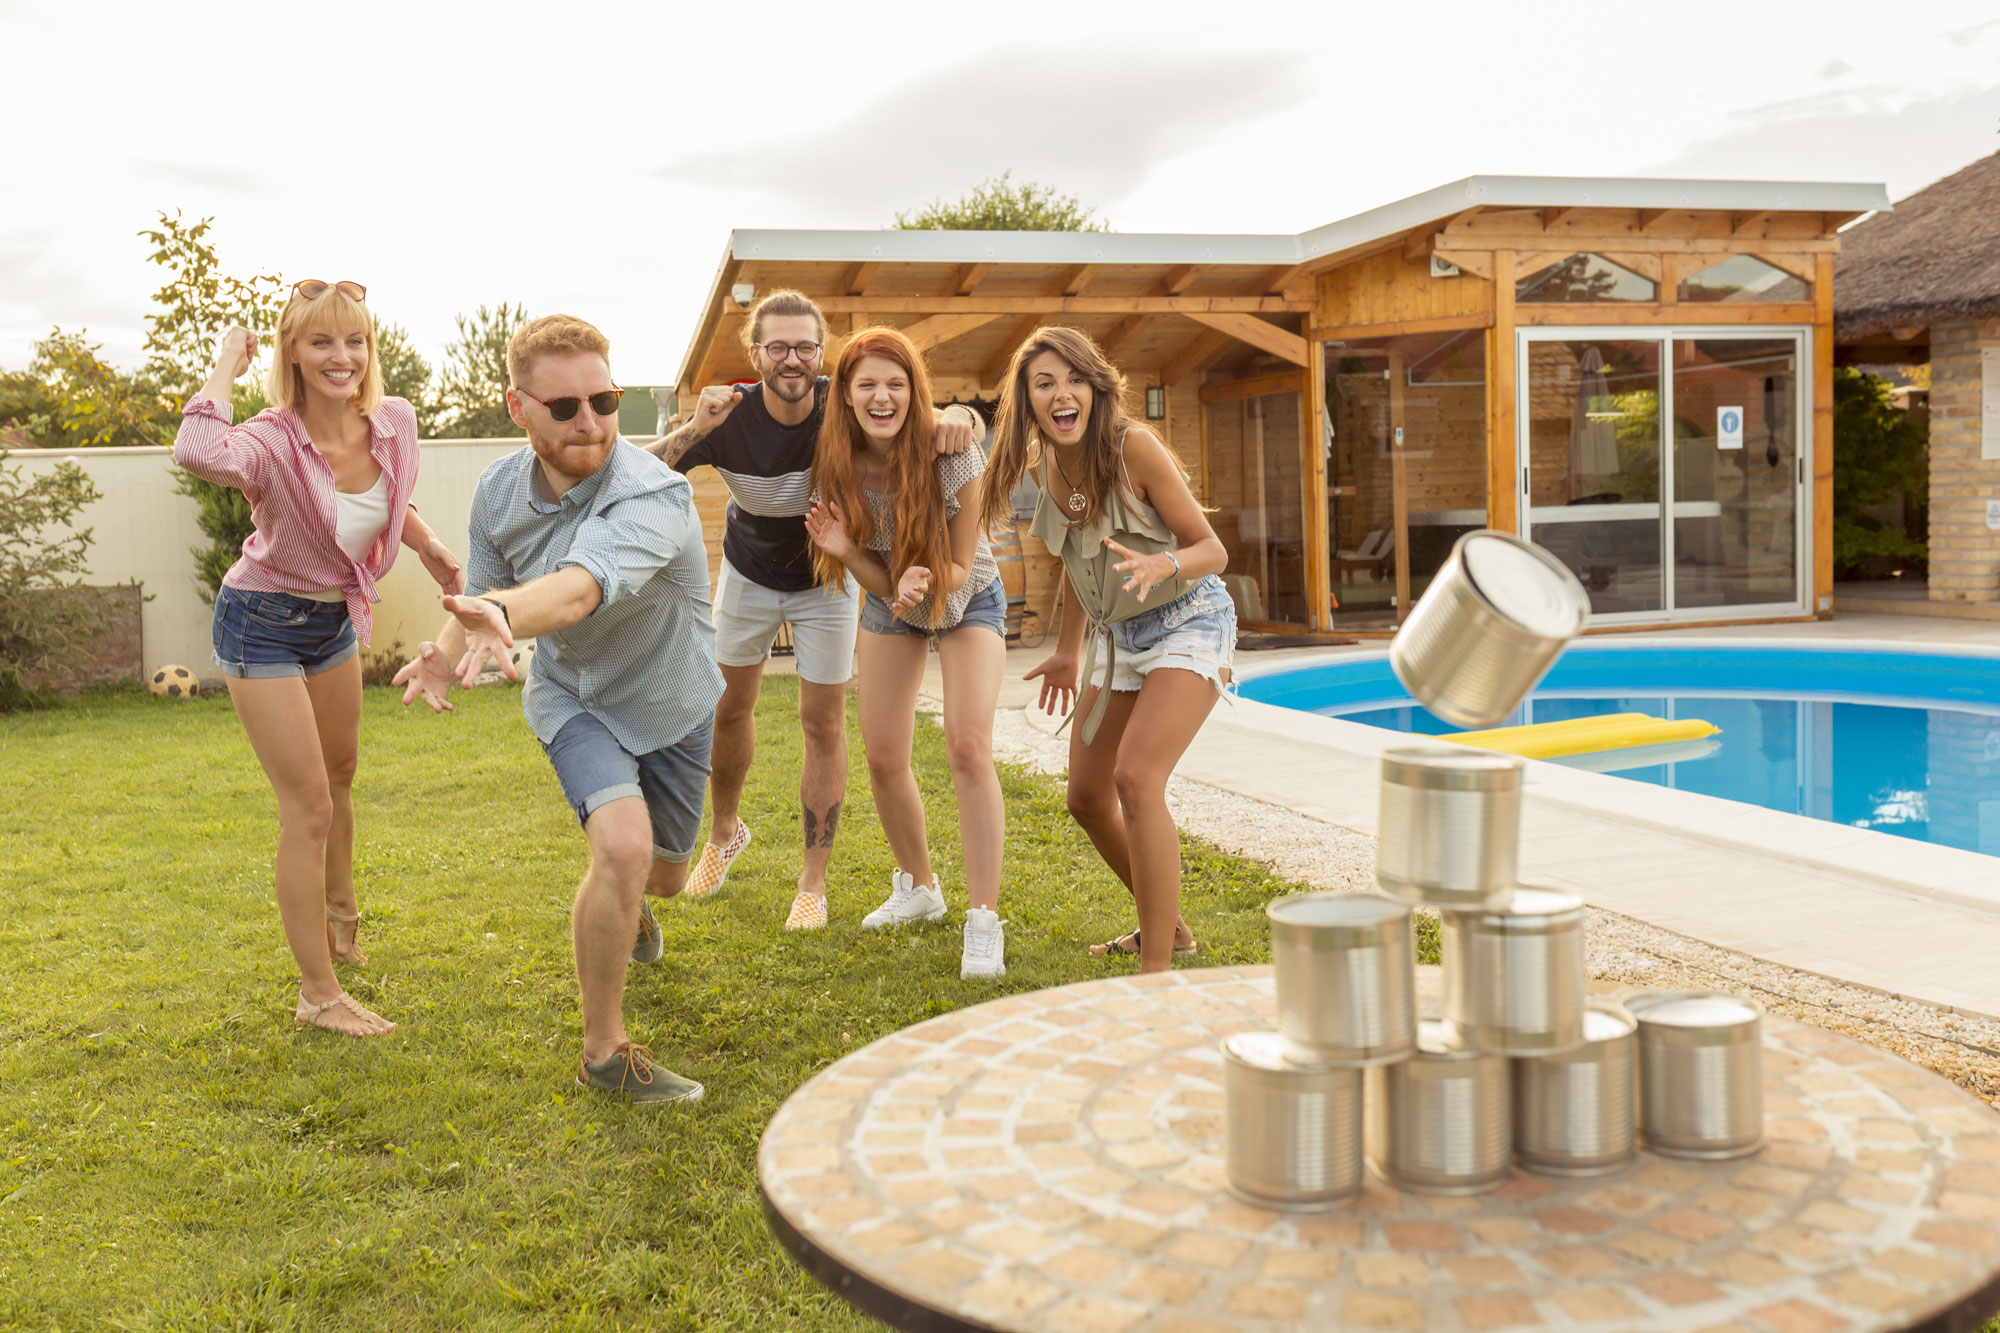 Poolside Games: Fun Activities for the Whole Family